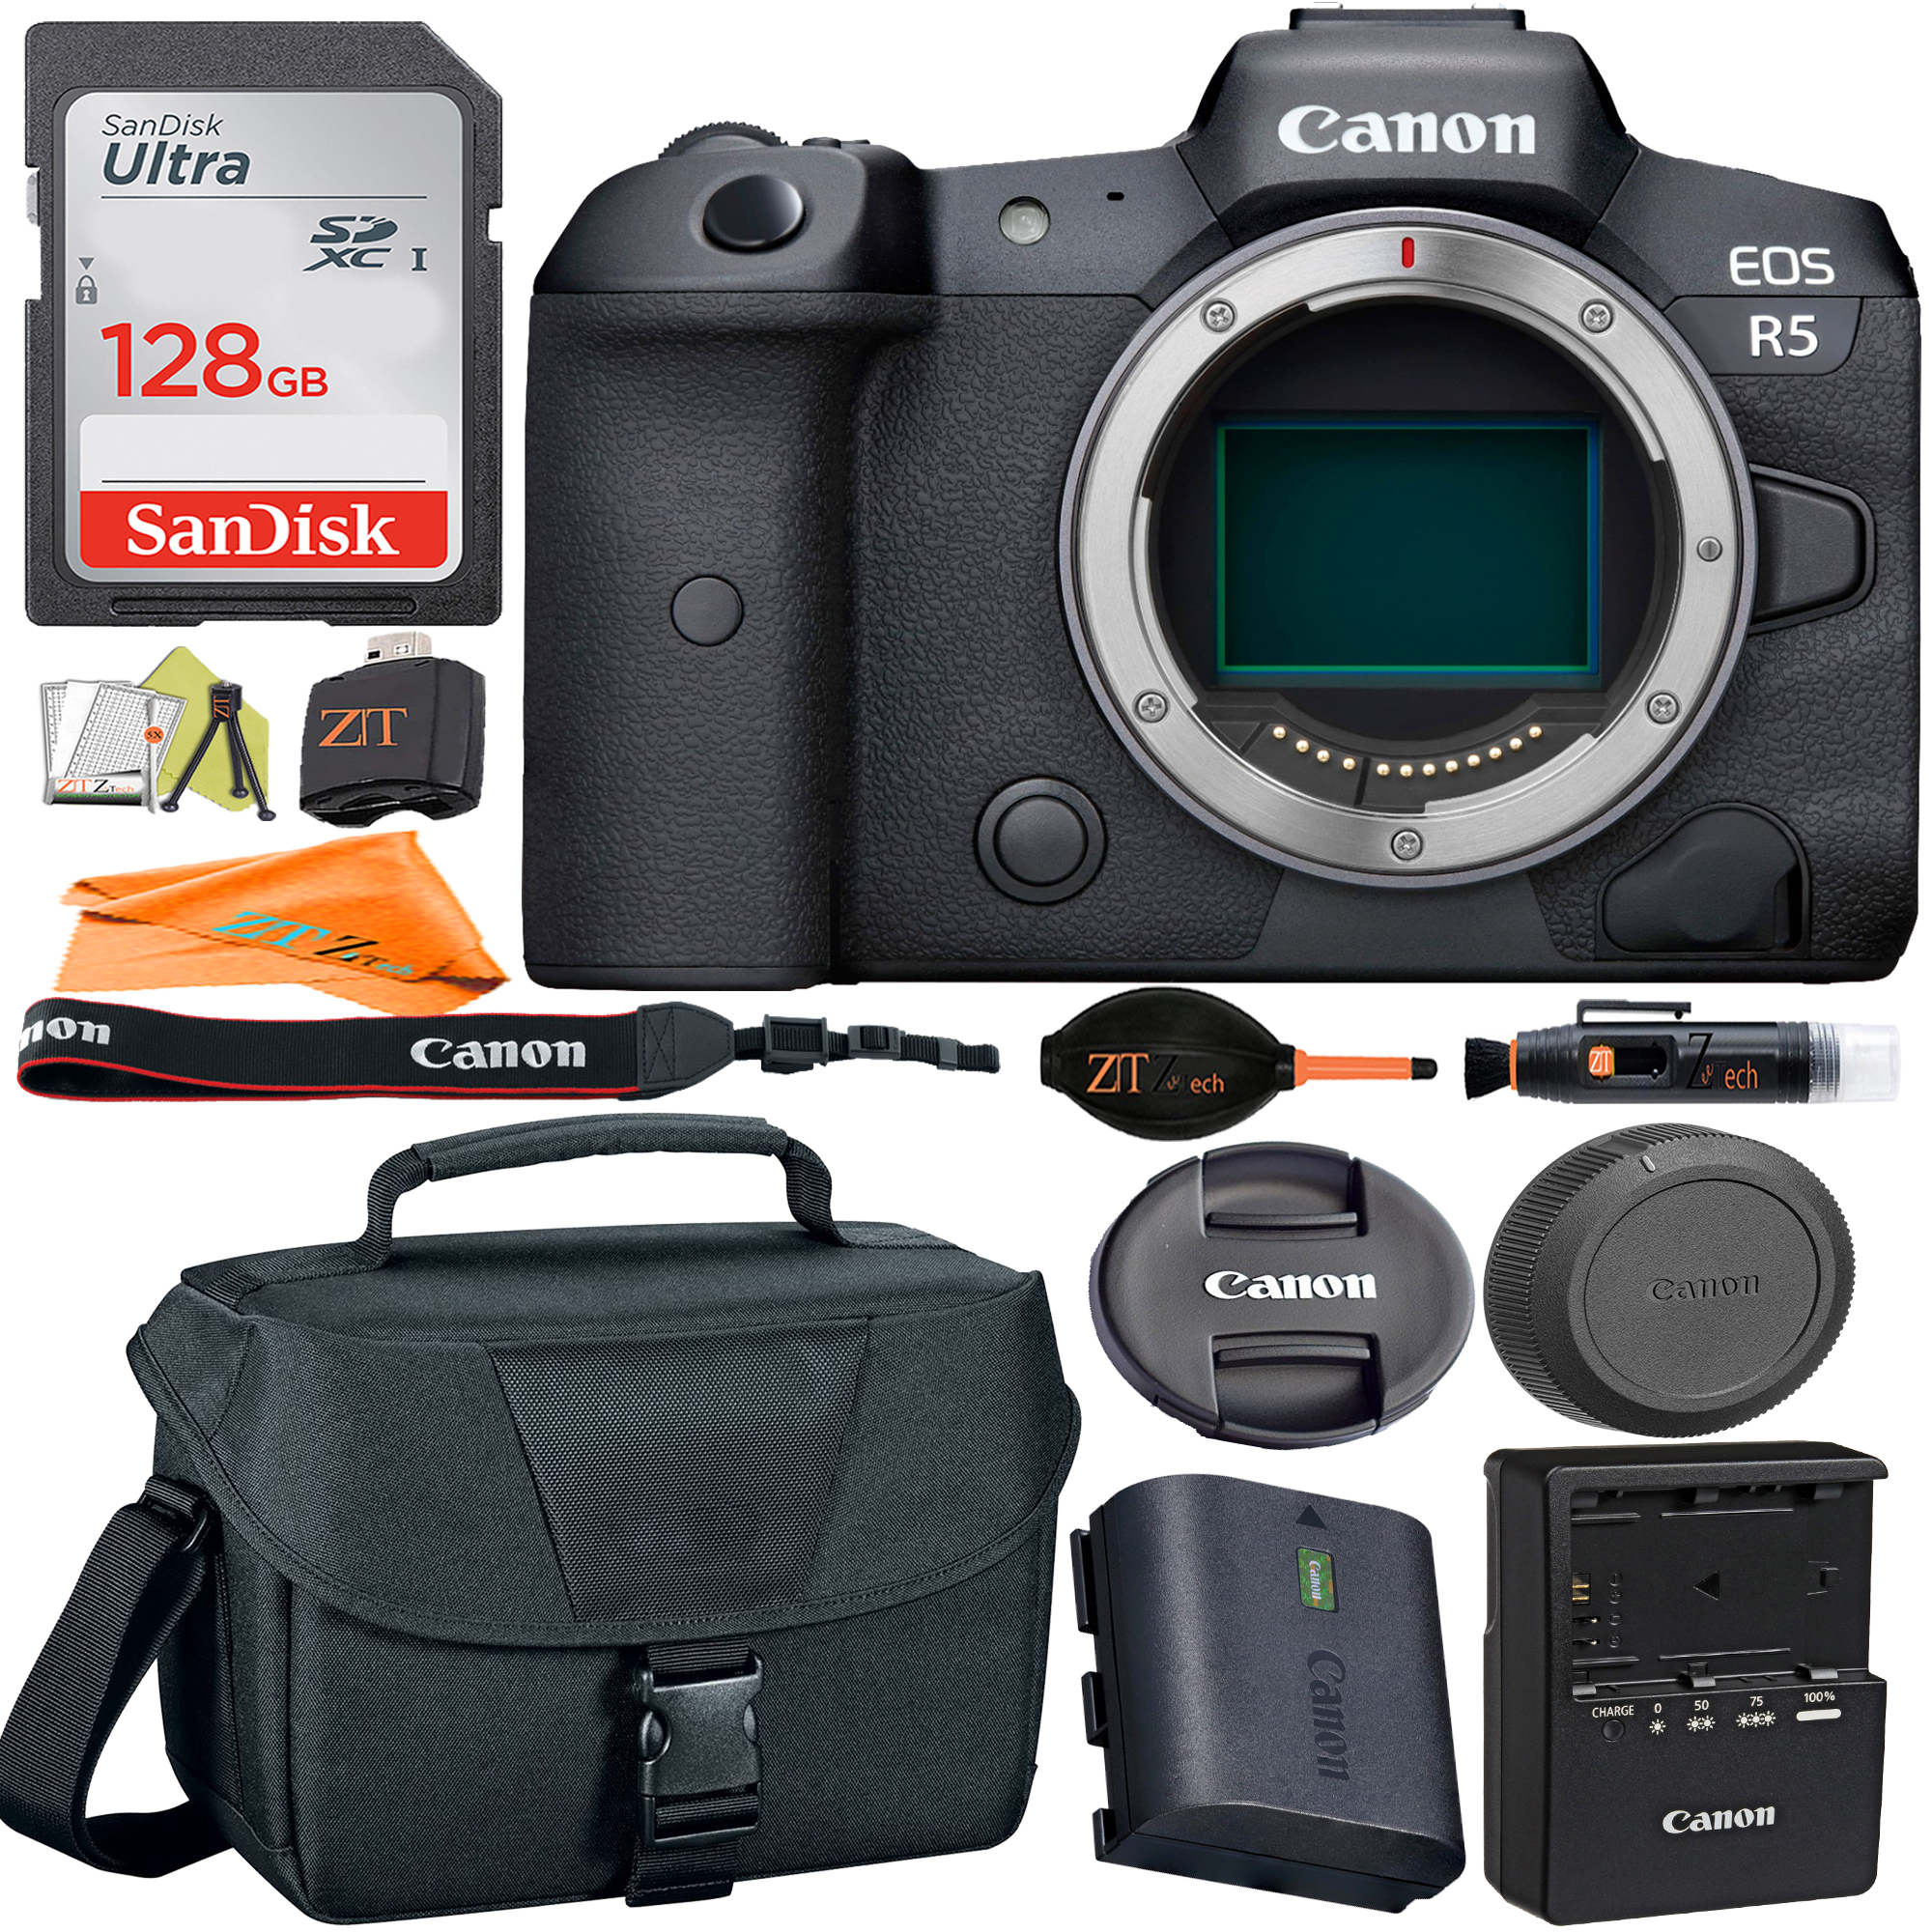 Canon EOS R5 Mirrorless Digital Camera (Body Only) Full-Frame with SanDisk 128GB + Case + ZeeTech Accessory Bundle